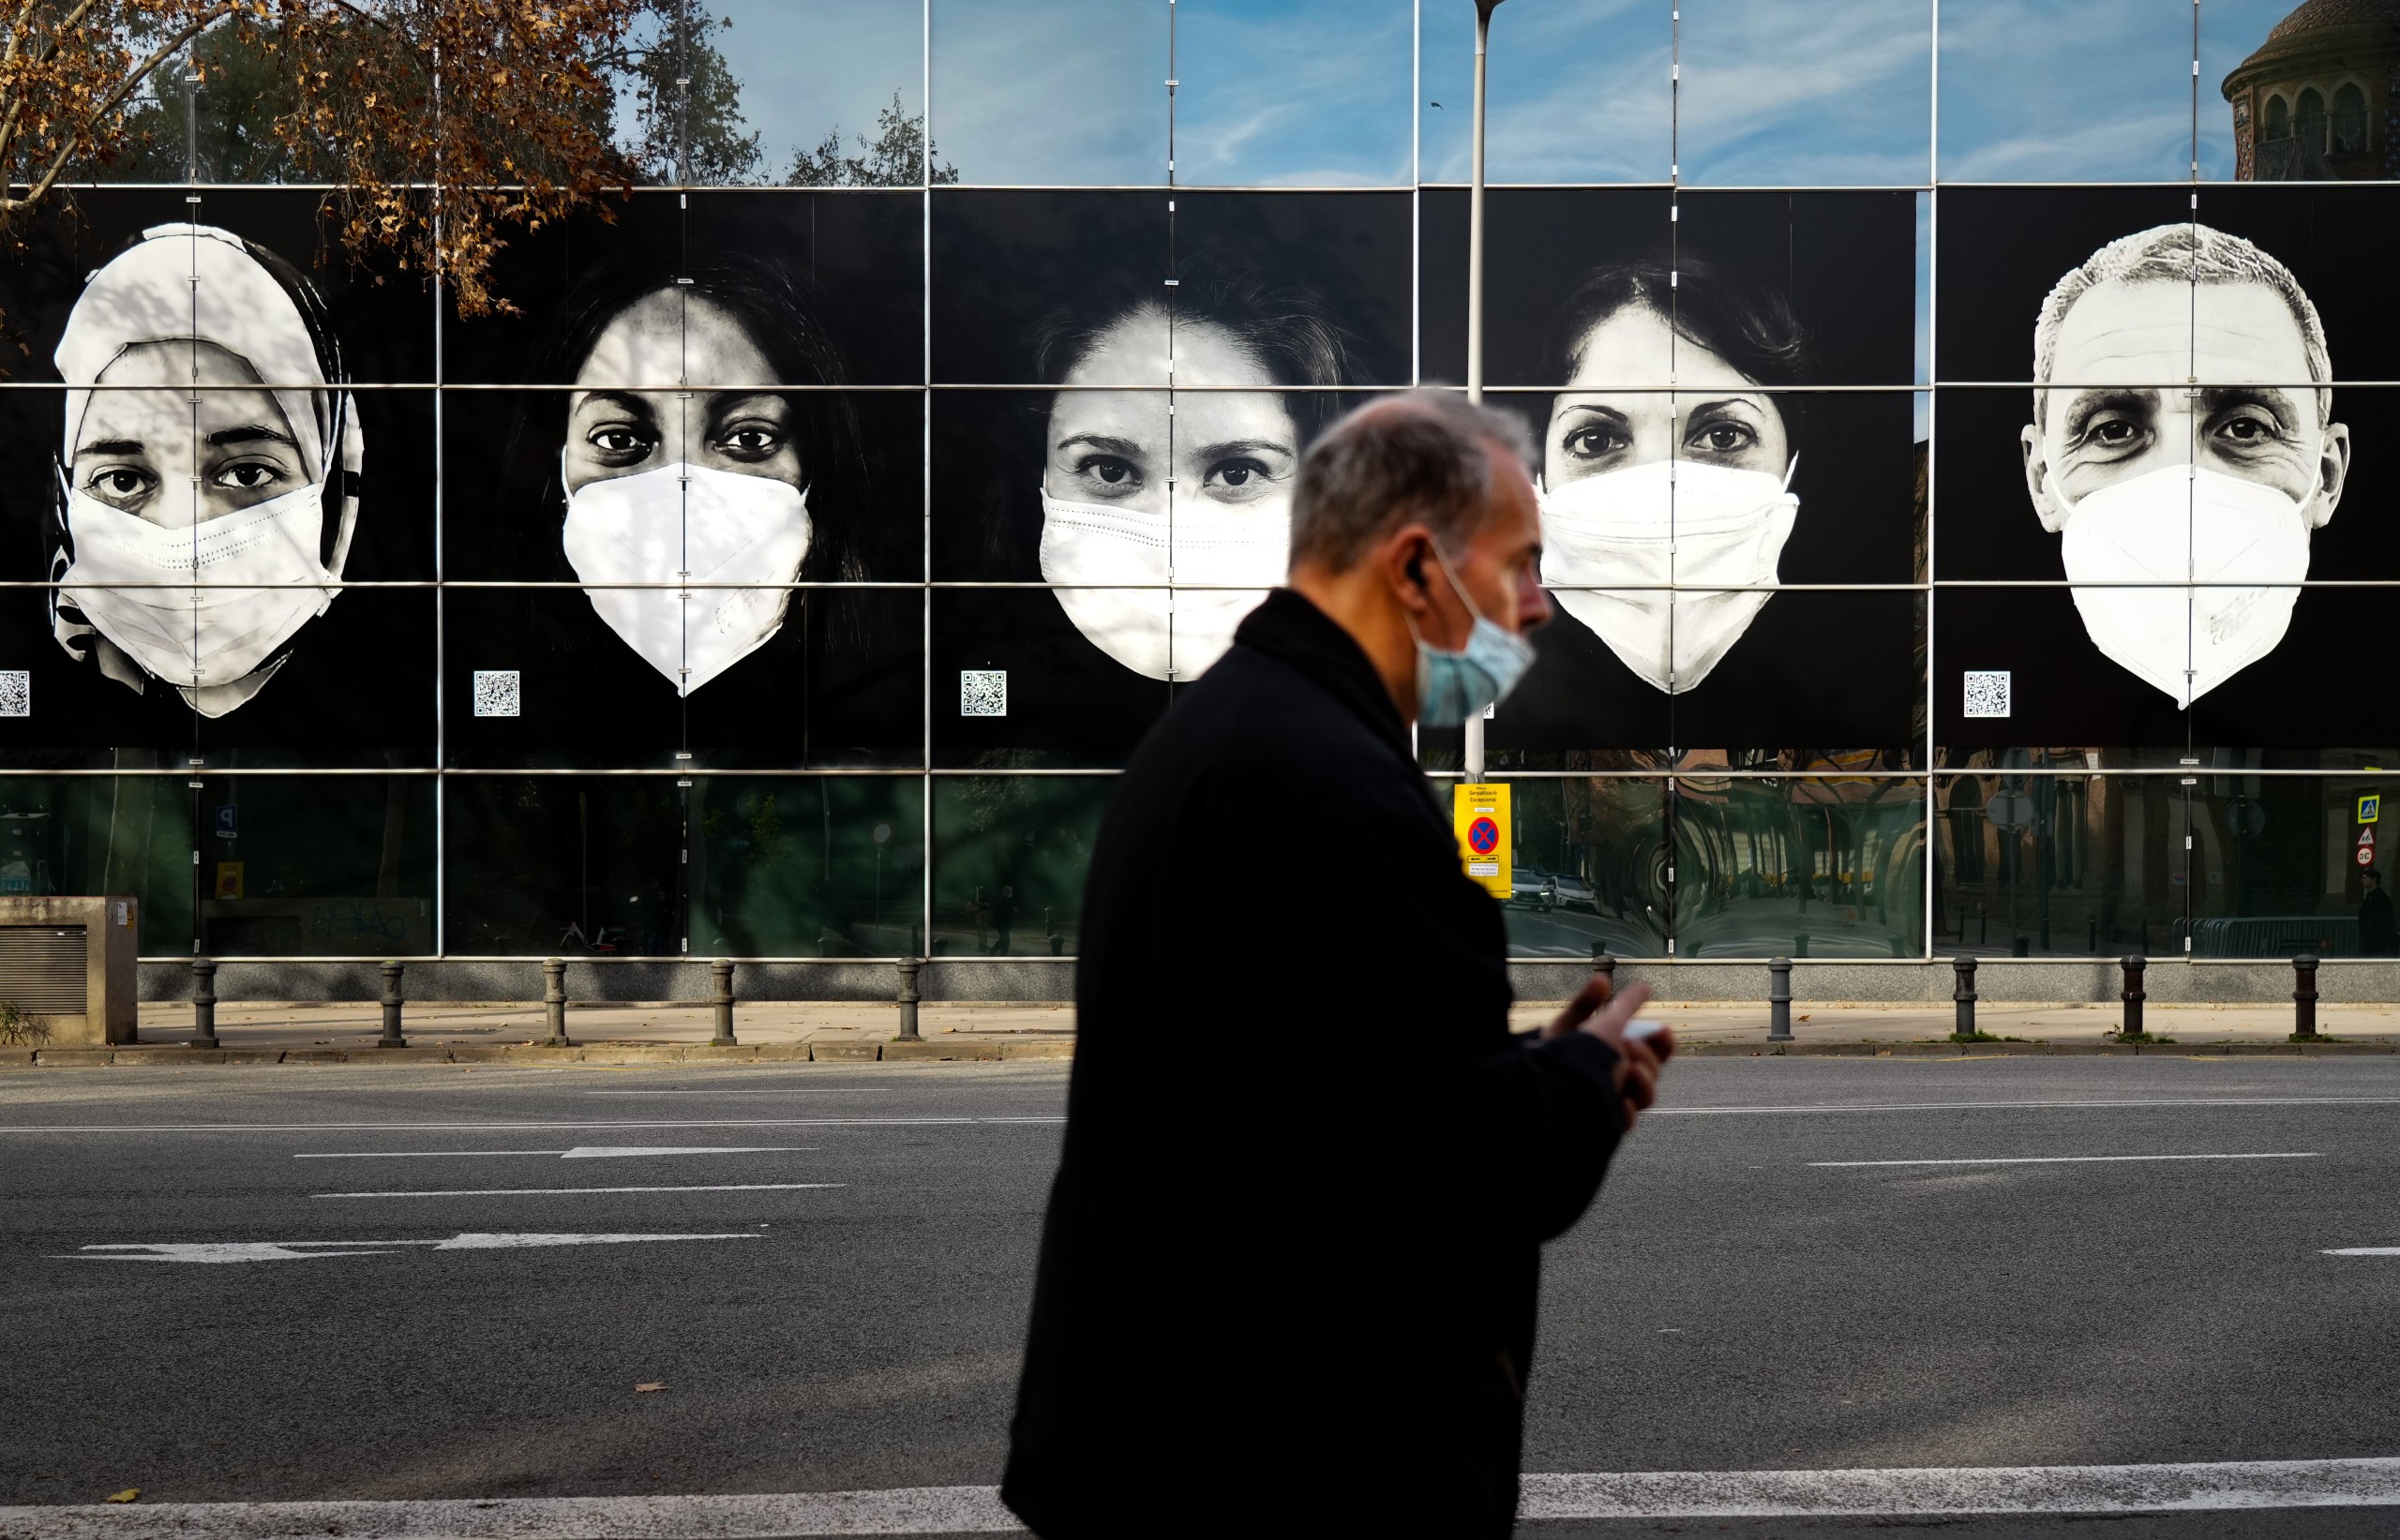 epa09657136 A man walks past a vaccination center in Barcelona, north-eastern Spain, 26 December 2021. As the omicron variant hit Spain, the government concluded this week that masks outdoors were the solution.  EPA/Enric Fontcuberta